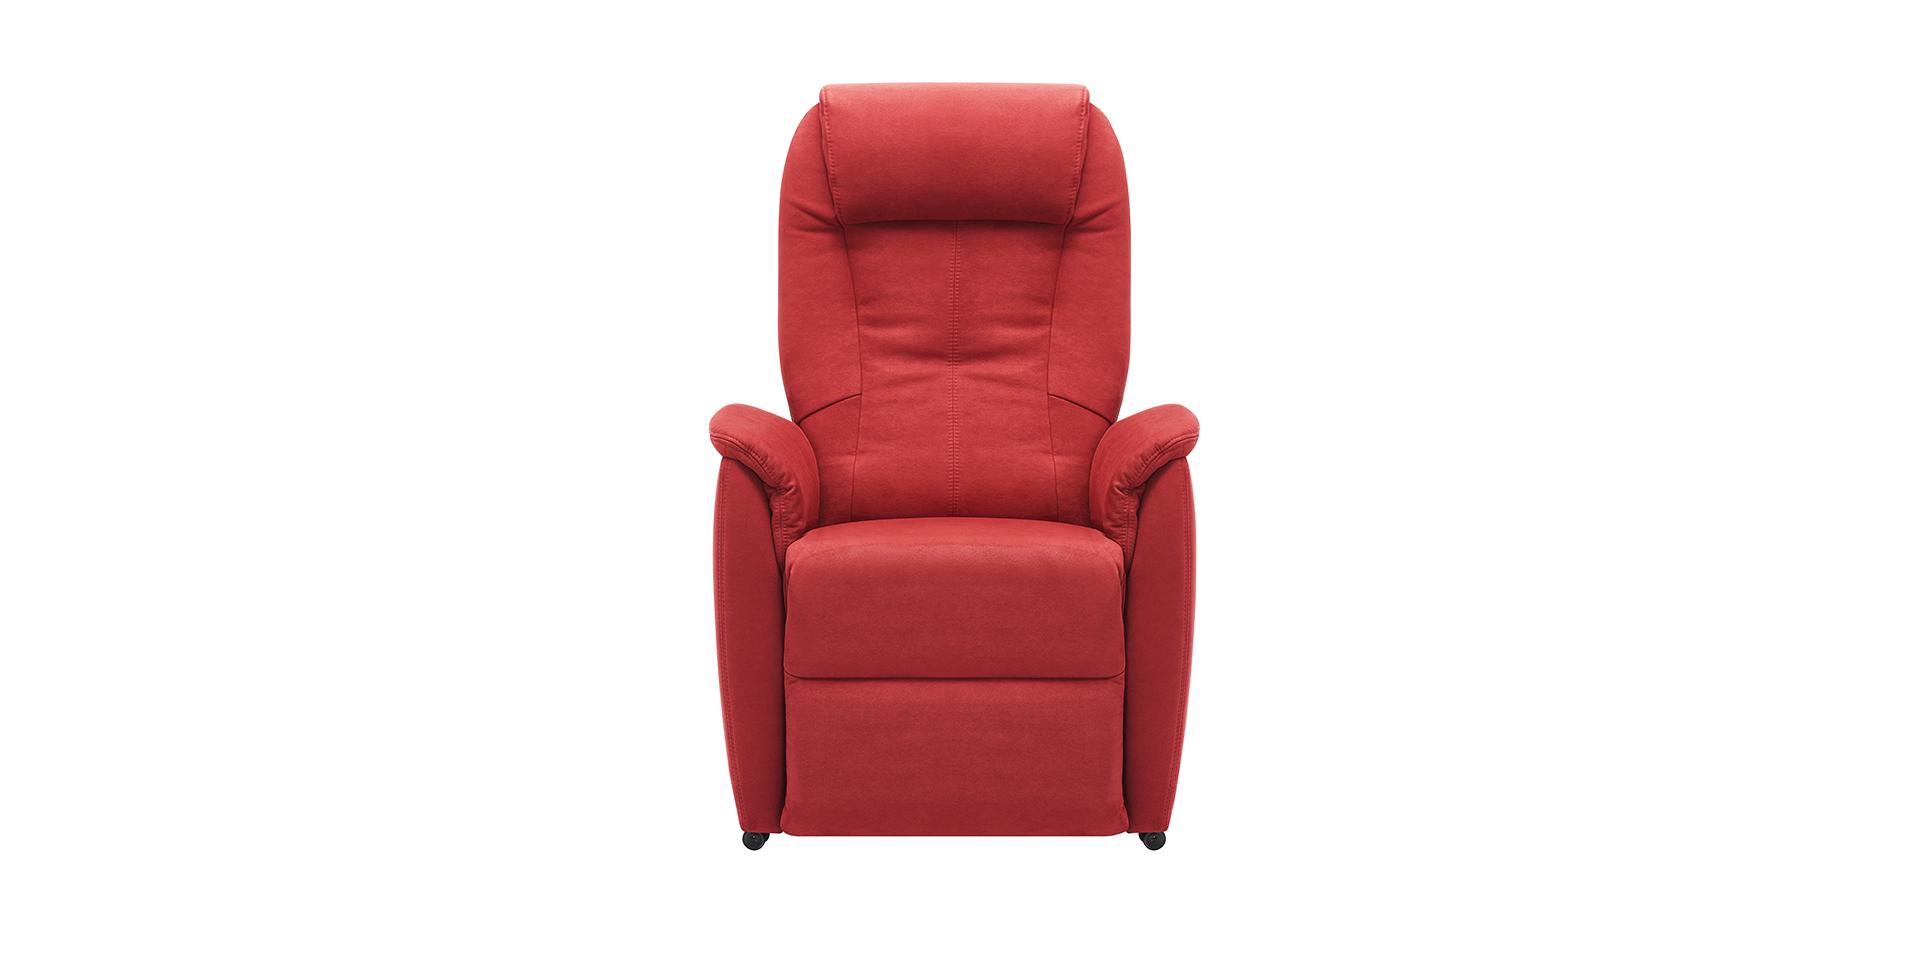 Slider Fauteuil relaxation 9107 (image 5)